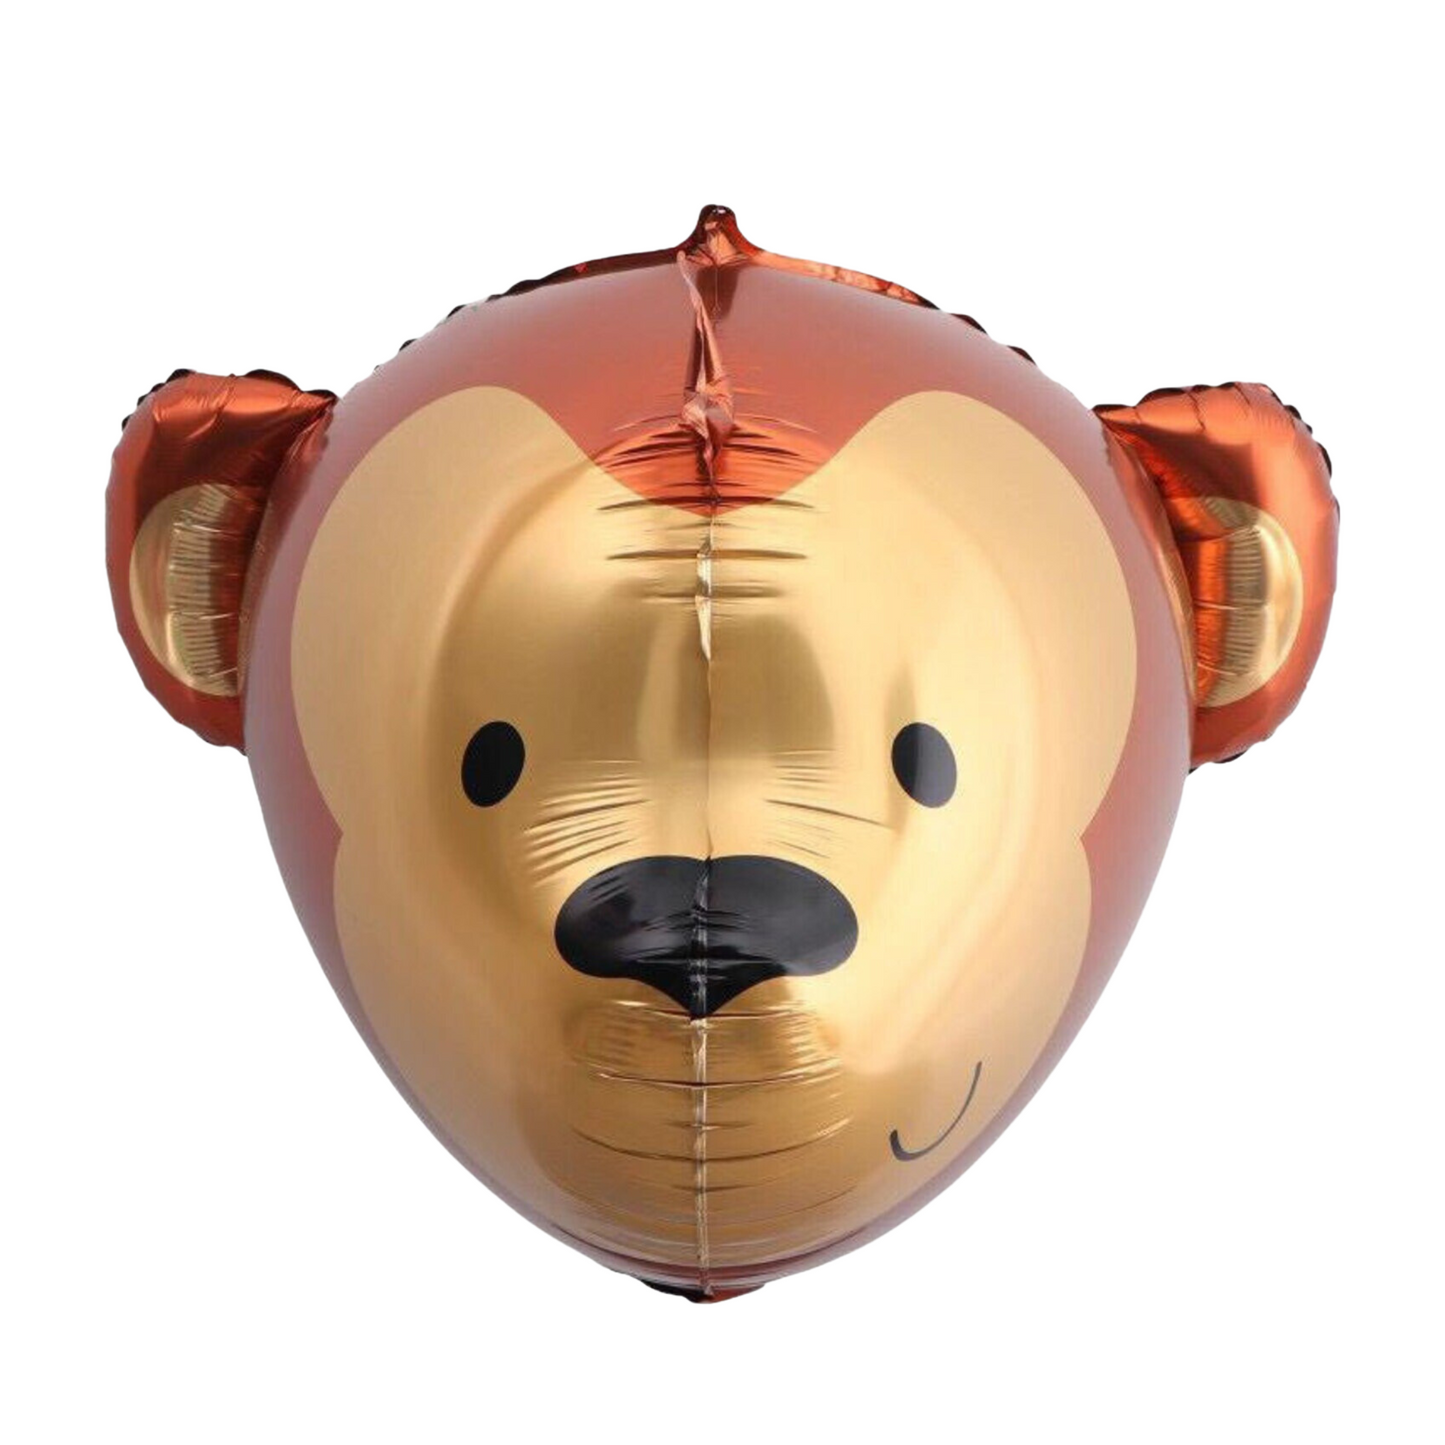 Lion, Tiger, Monkey, Deer and Elephant Head Balloons